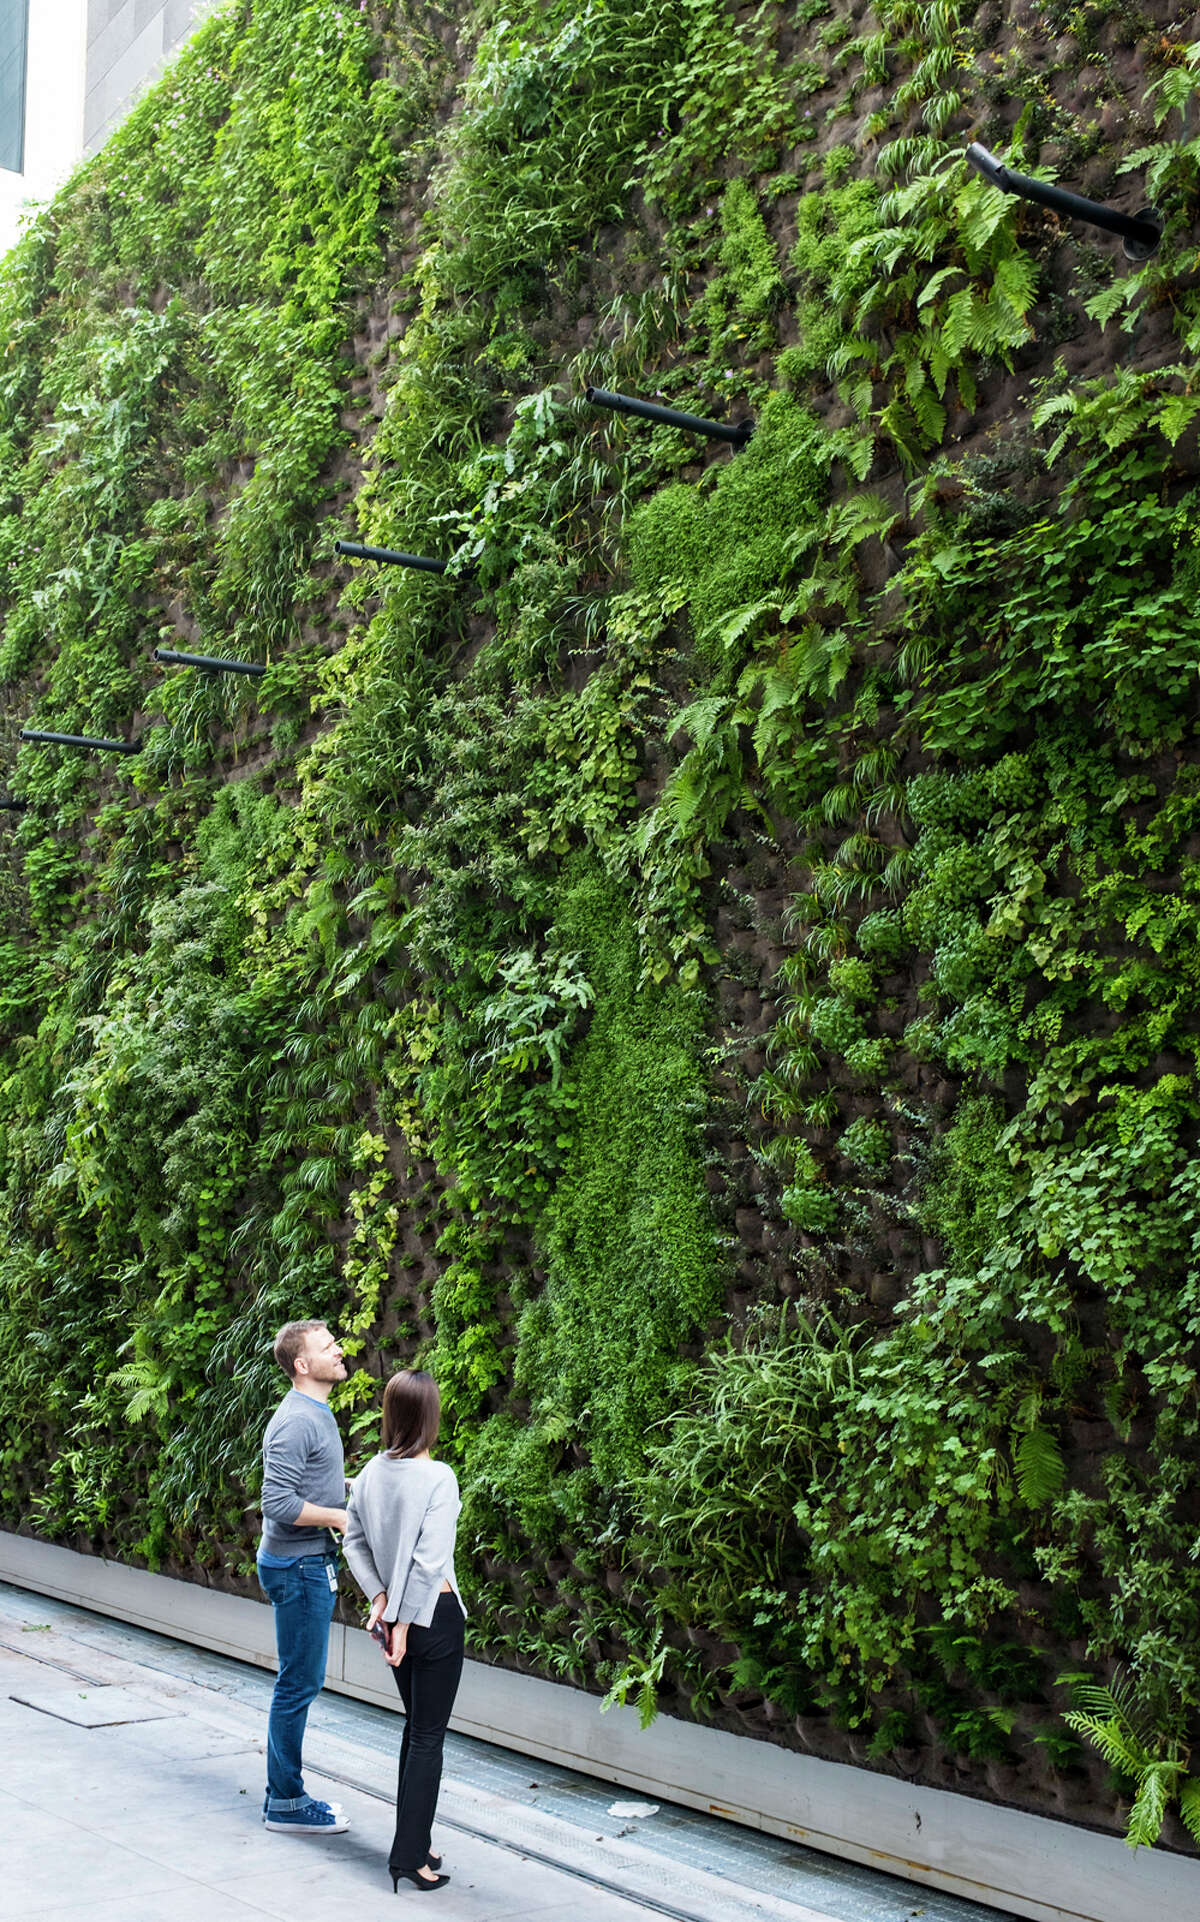 SFMOMA officials are calling it the largest living wall in the Bay Area. 